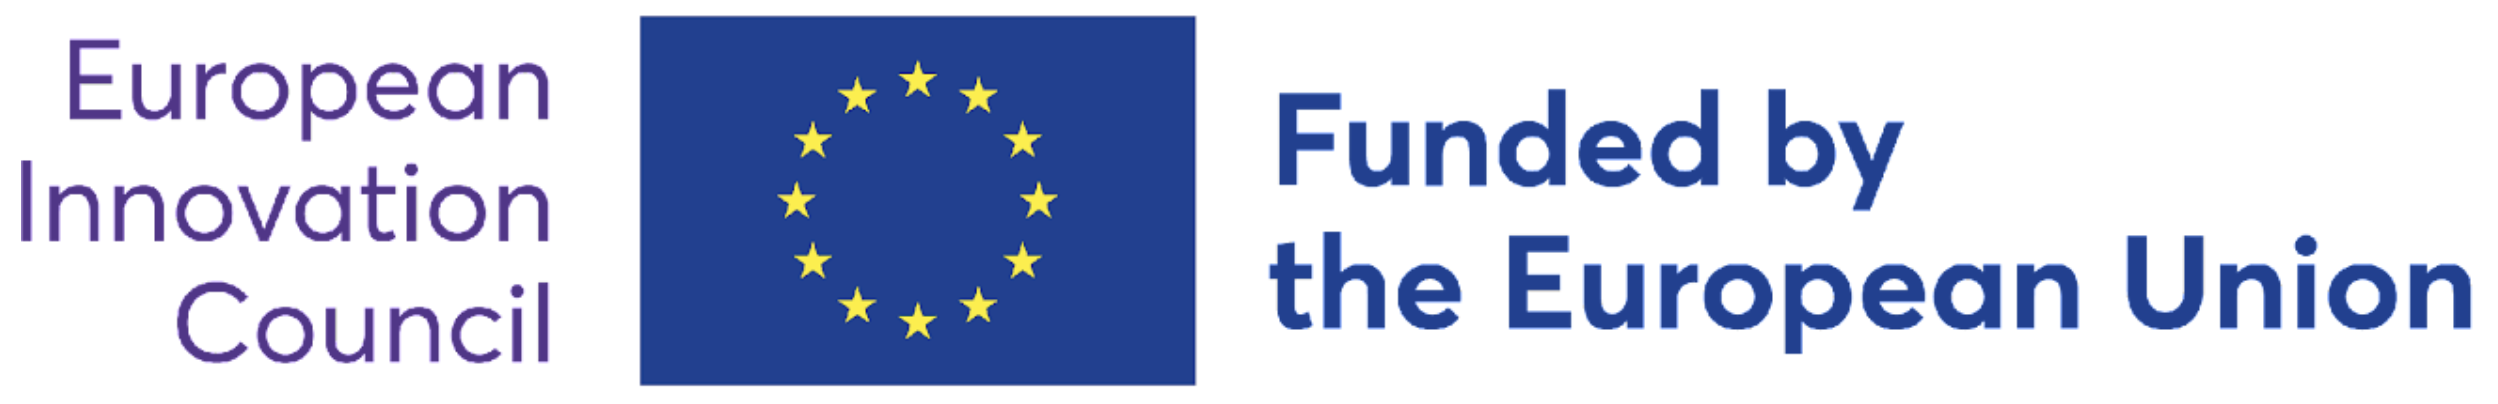 European Innovation Council Logo (Funded by the European Union)